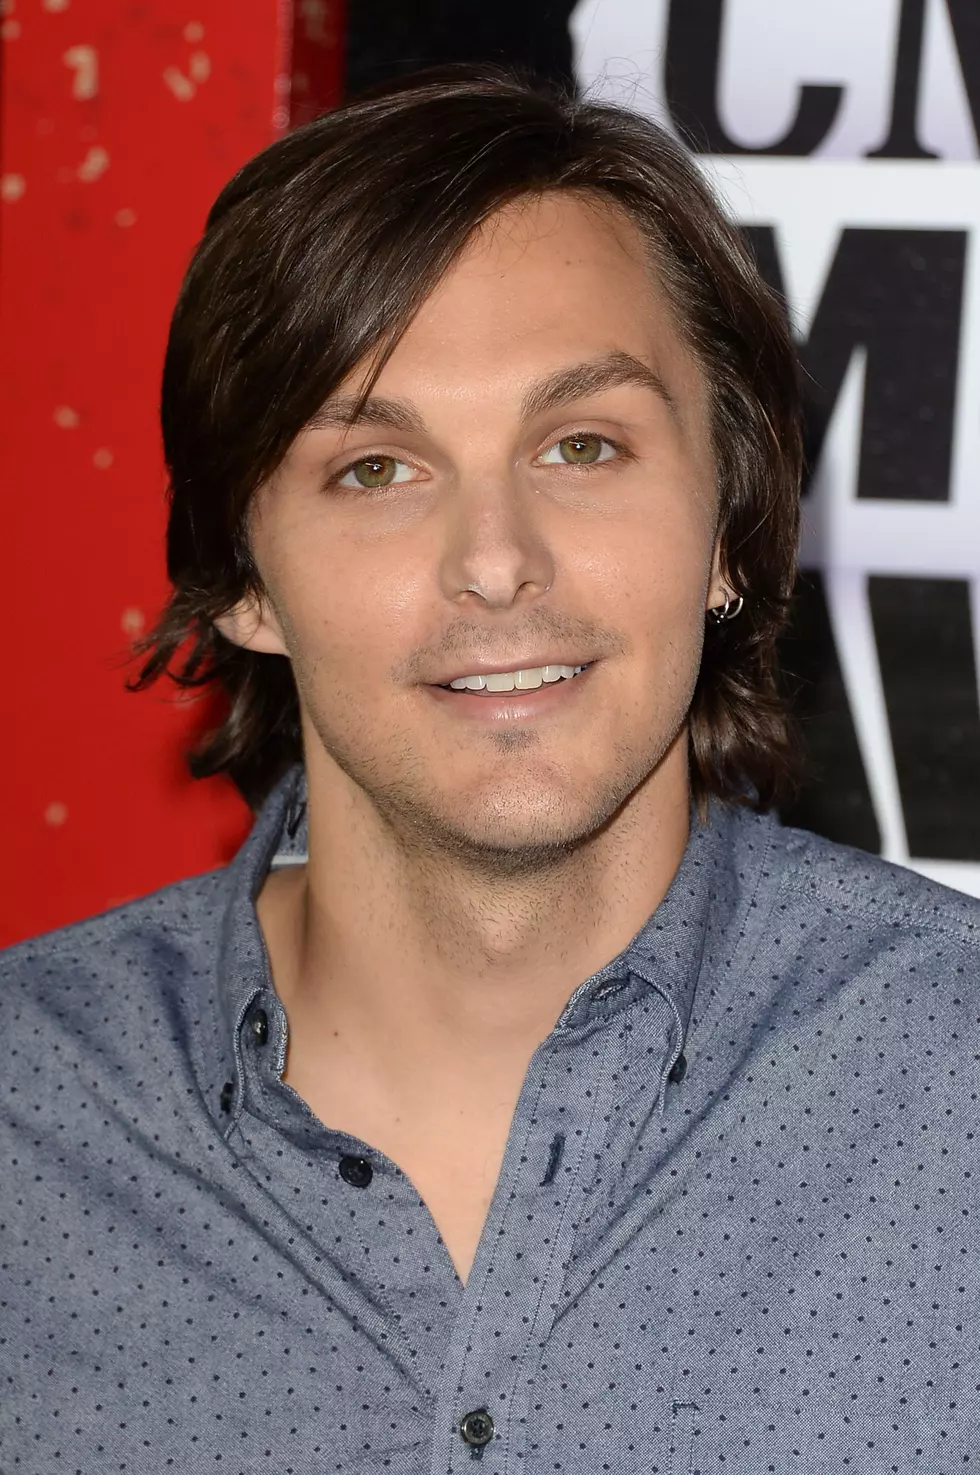 Check Out What Charlie Worsham Is Dressing Up As For Halloween [PICTURE]